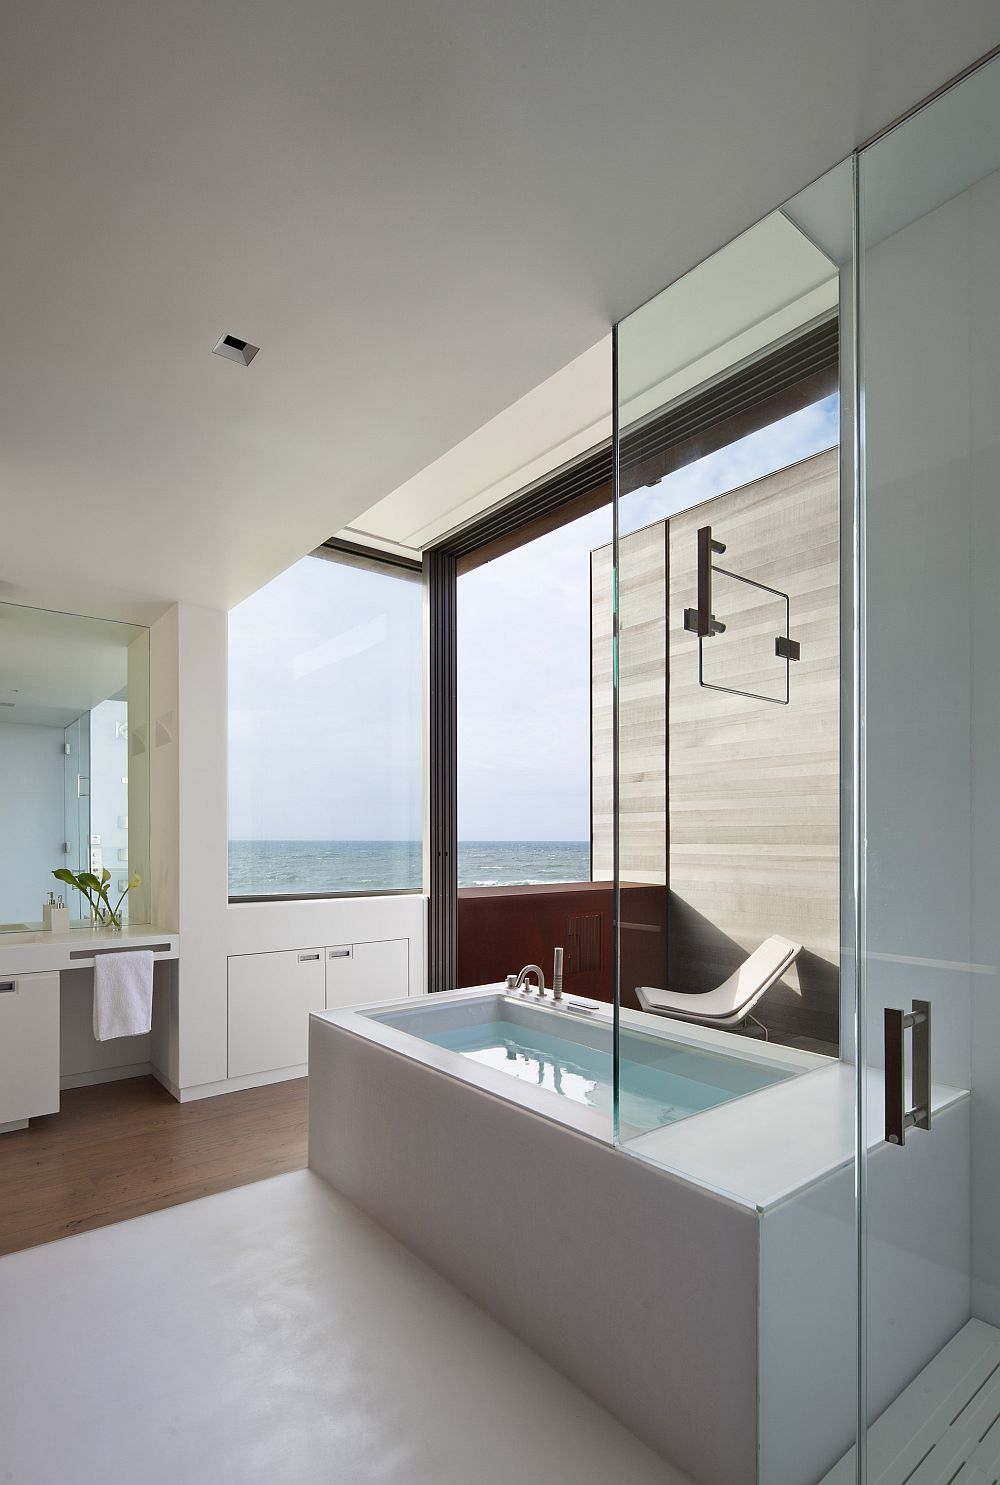 Beautiful contemporary bathroom in white with ocean views